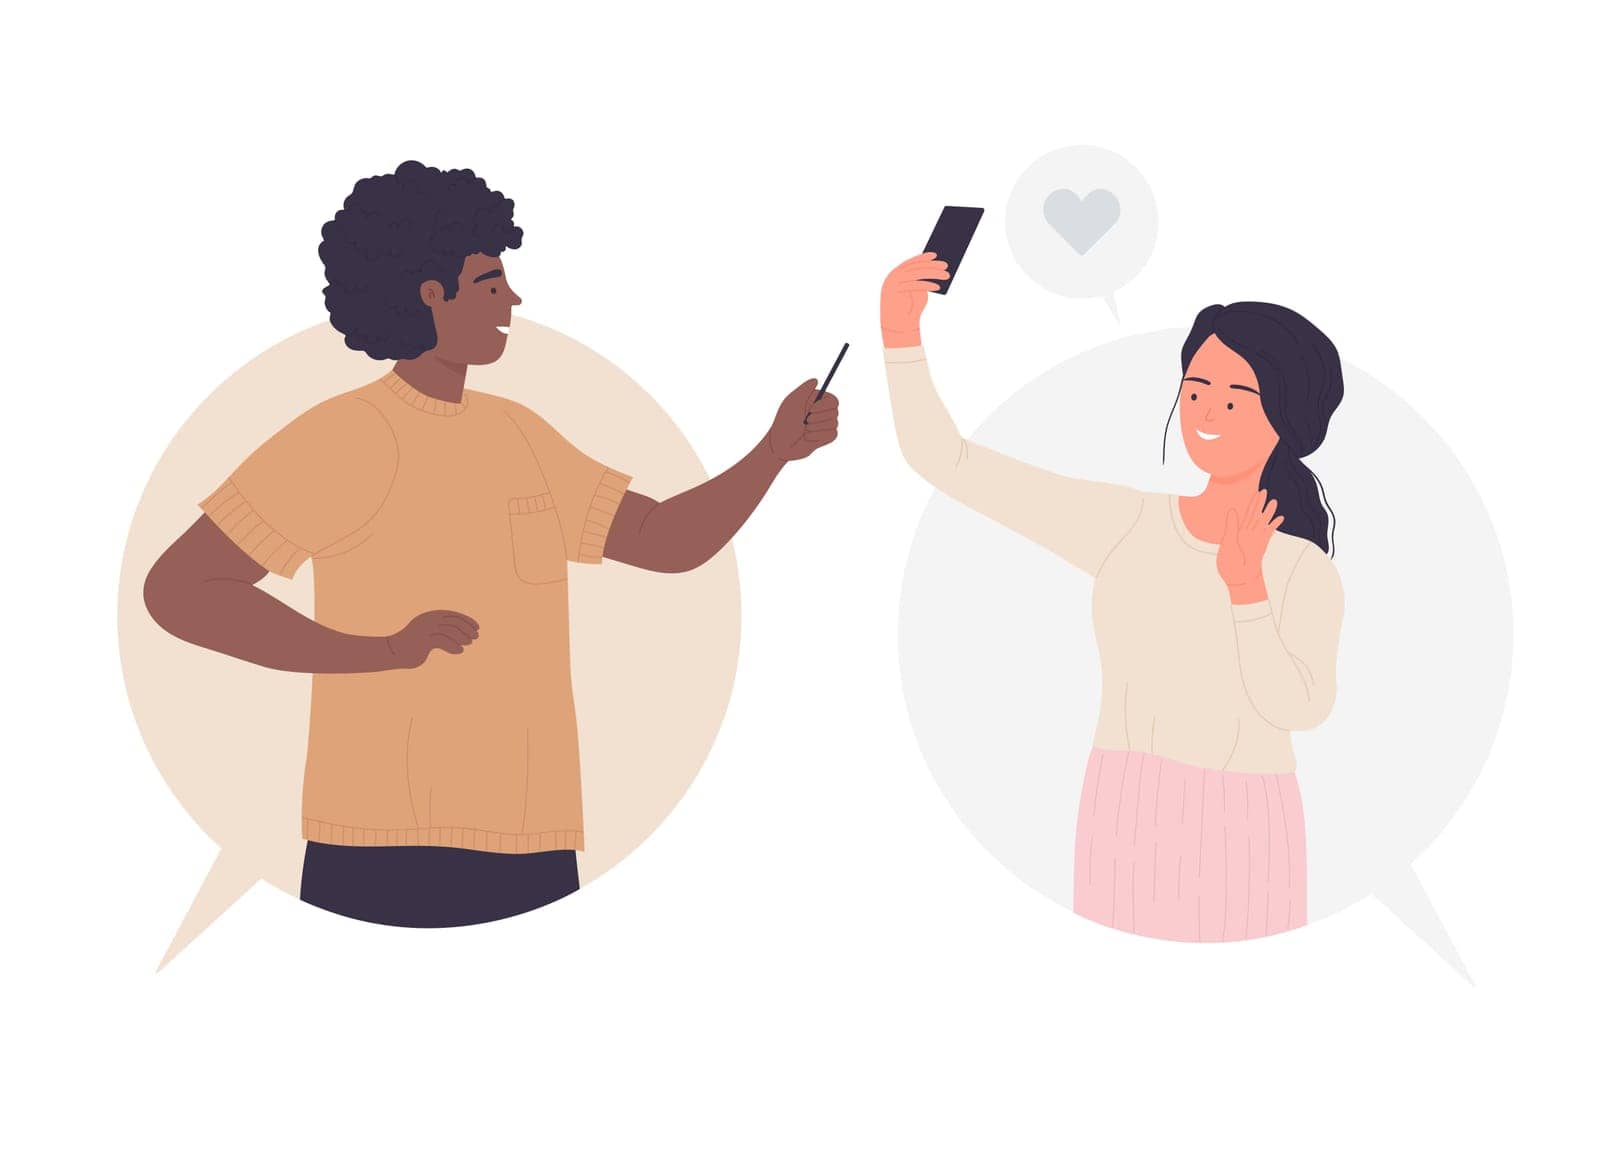 Online vlogging activity. Posting personal content, social media audience vector illustration